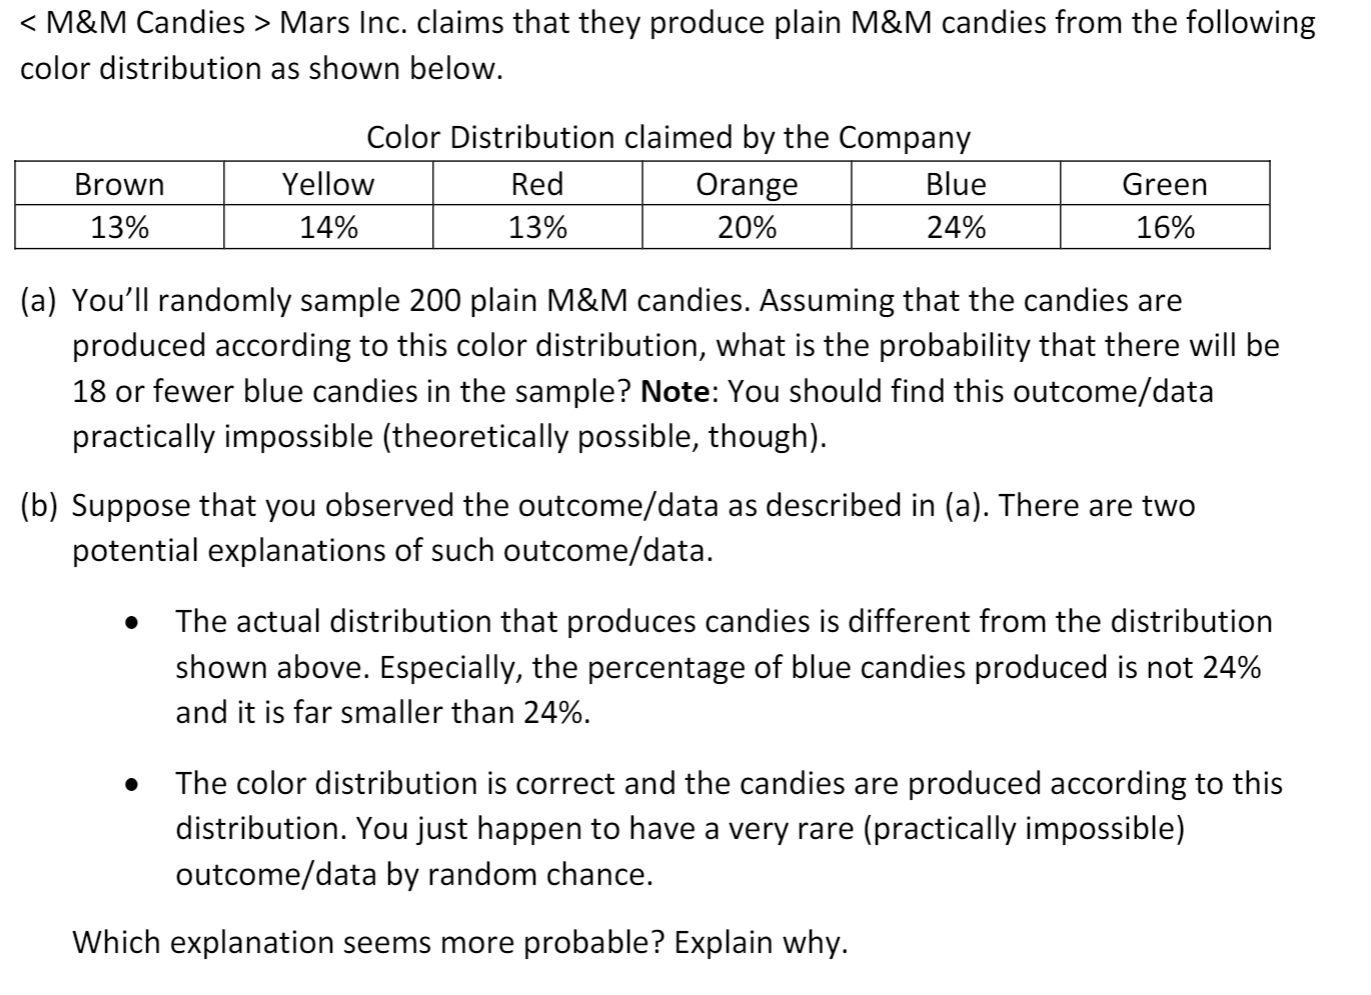 The Mars Candy Company claim that its M&M plain candies are